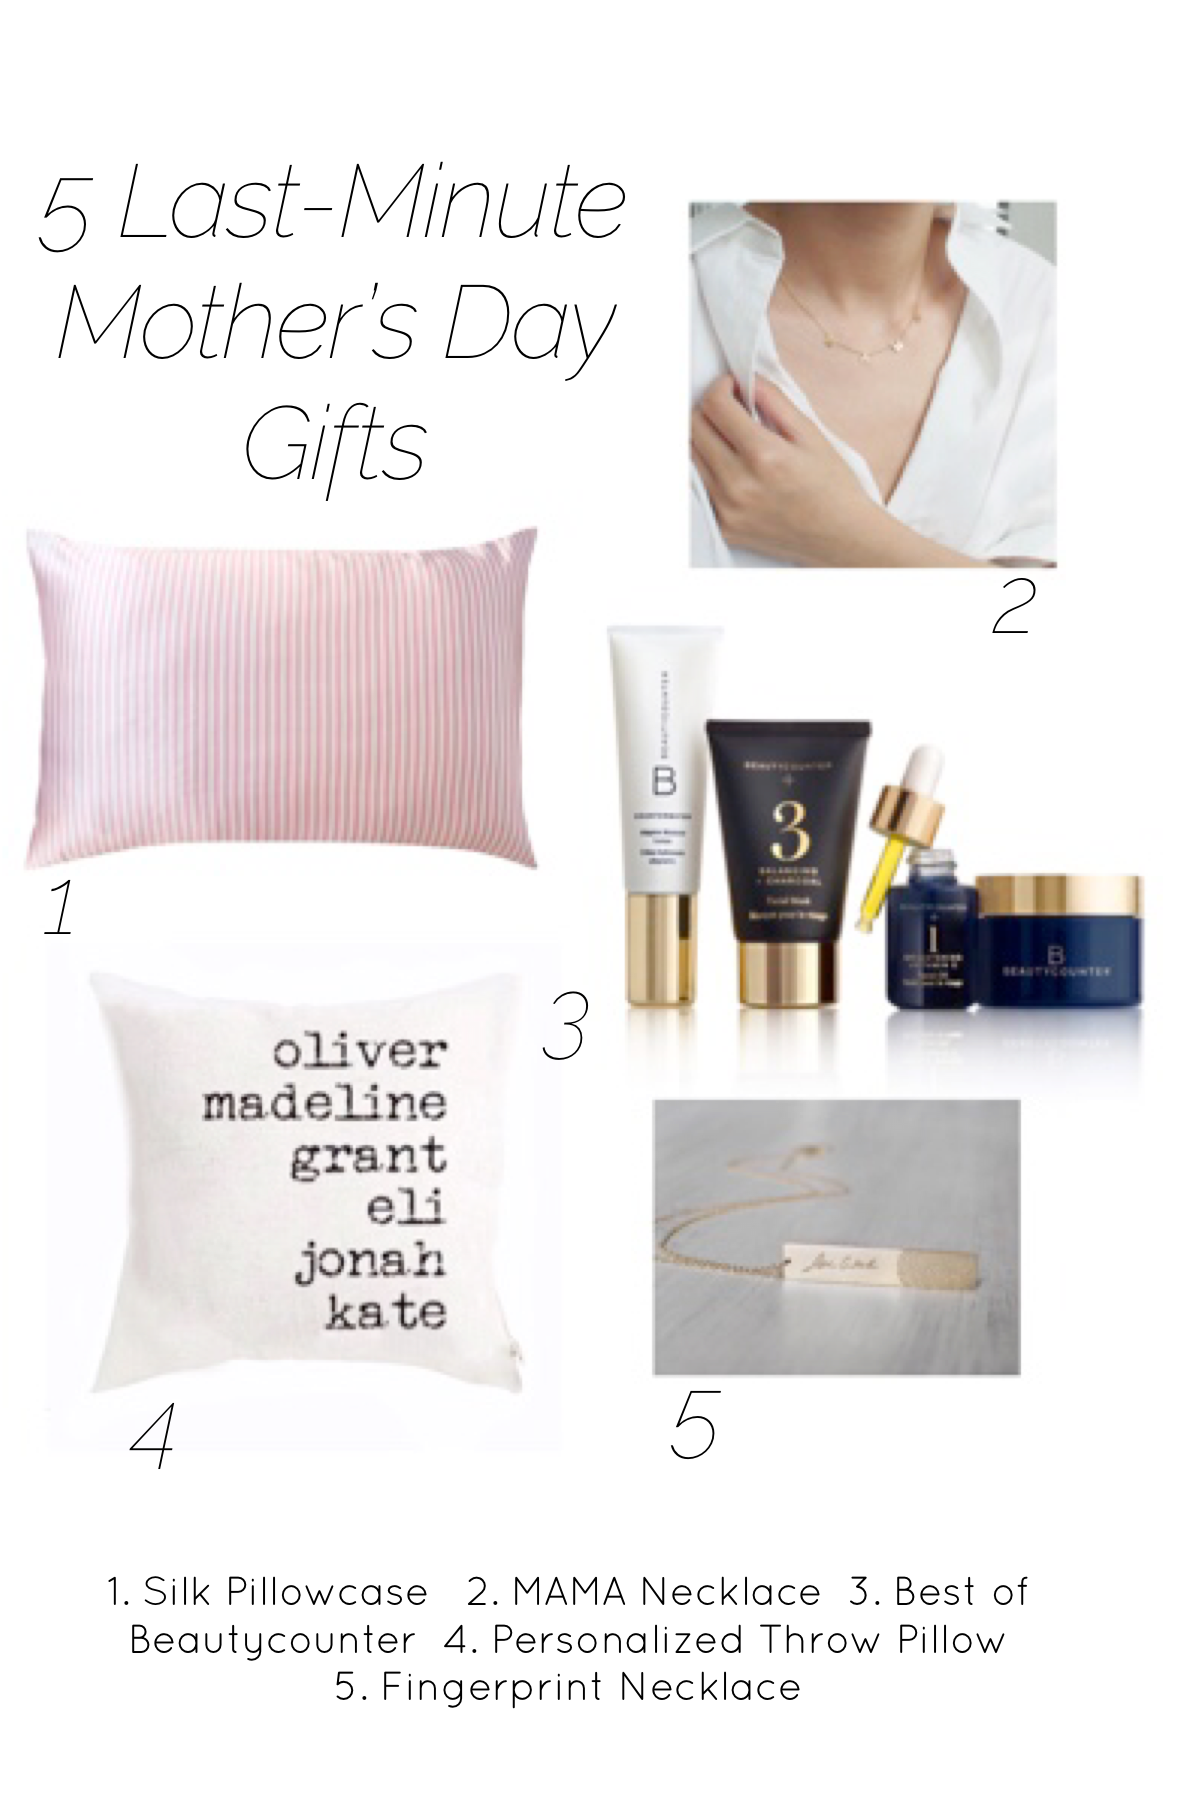 5 Last Minute Mother's Day Gifts